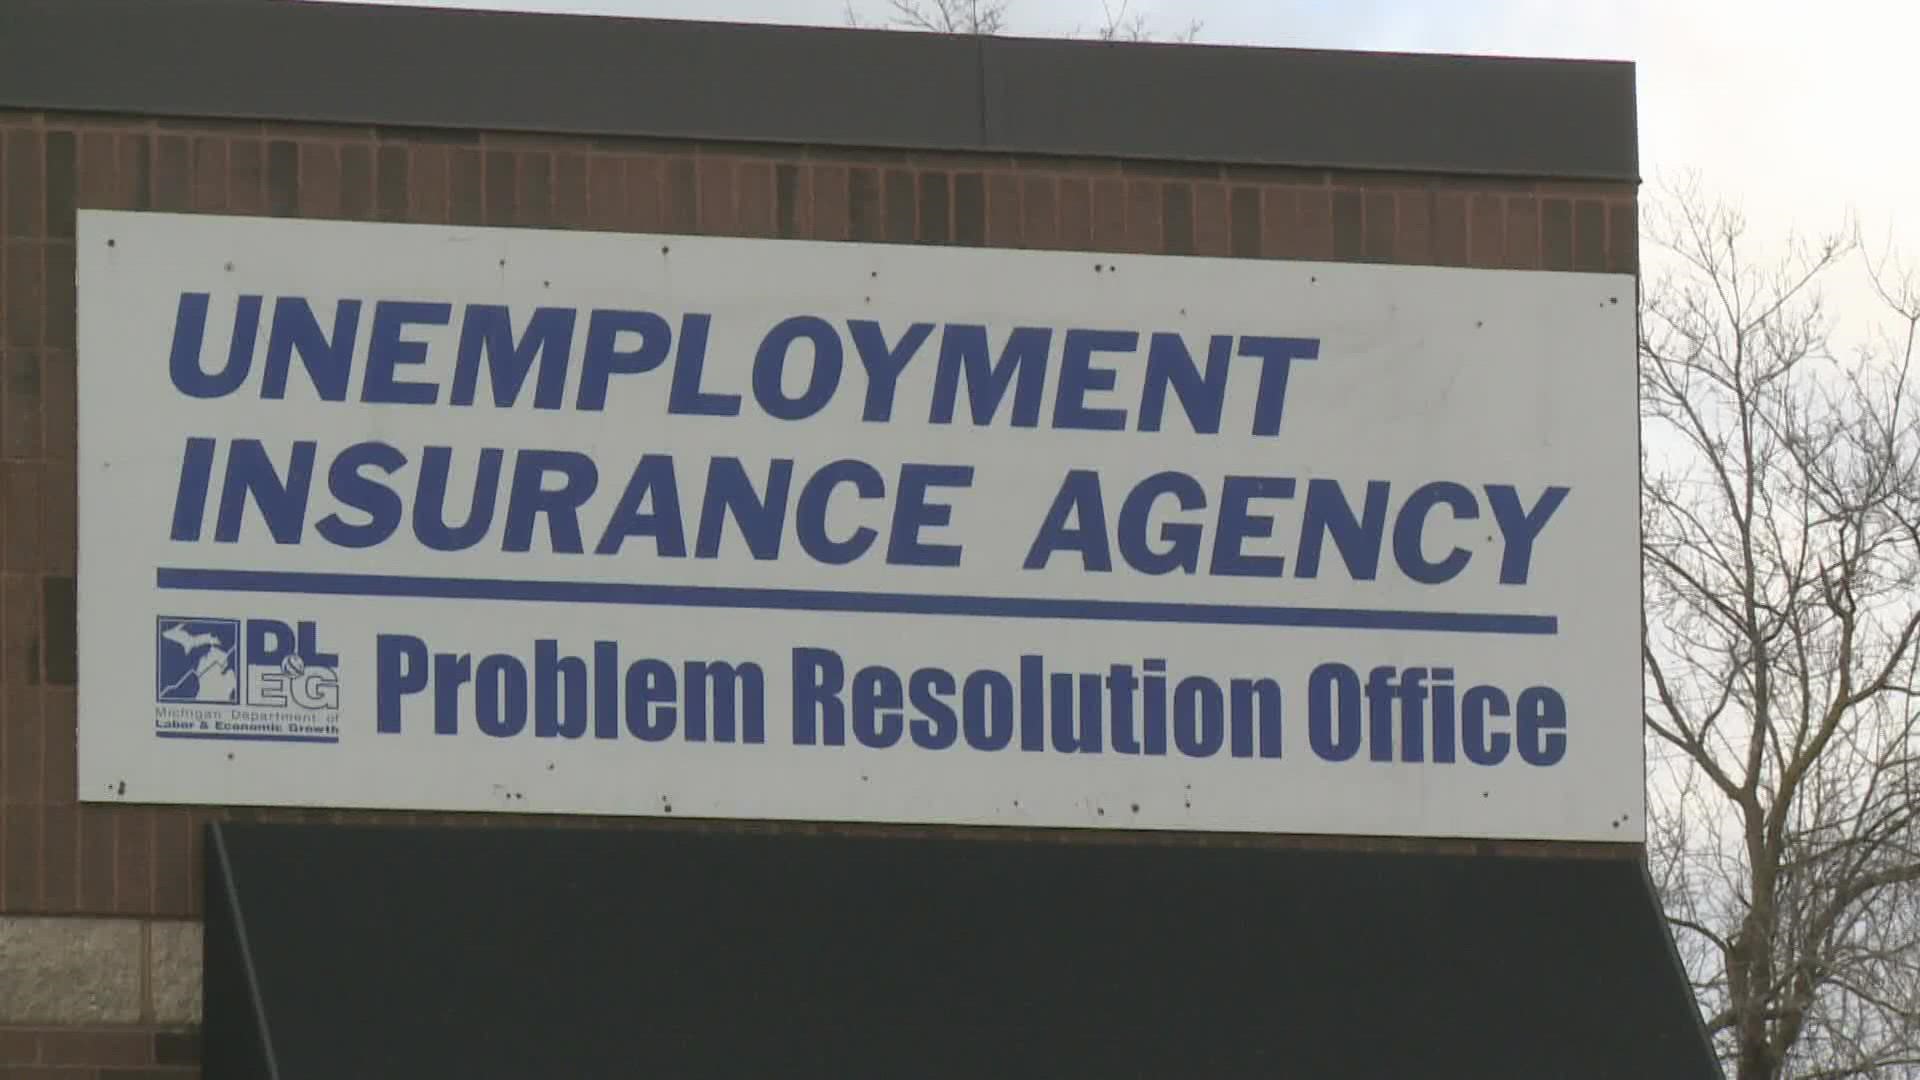 Action is finally being taken to waive billions of dollars in overpayment claims by the state's Unemployment Insurance Agency.